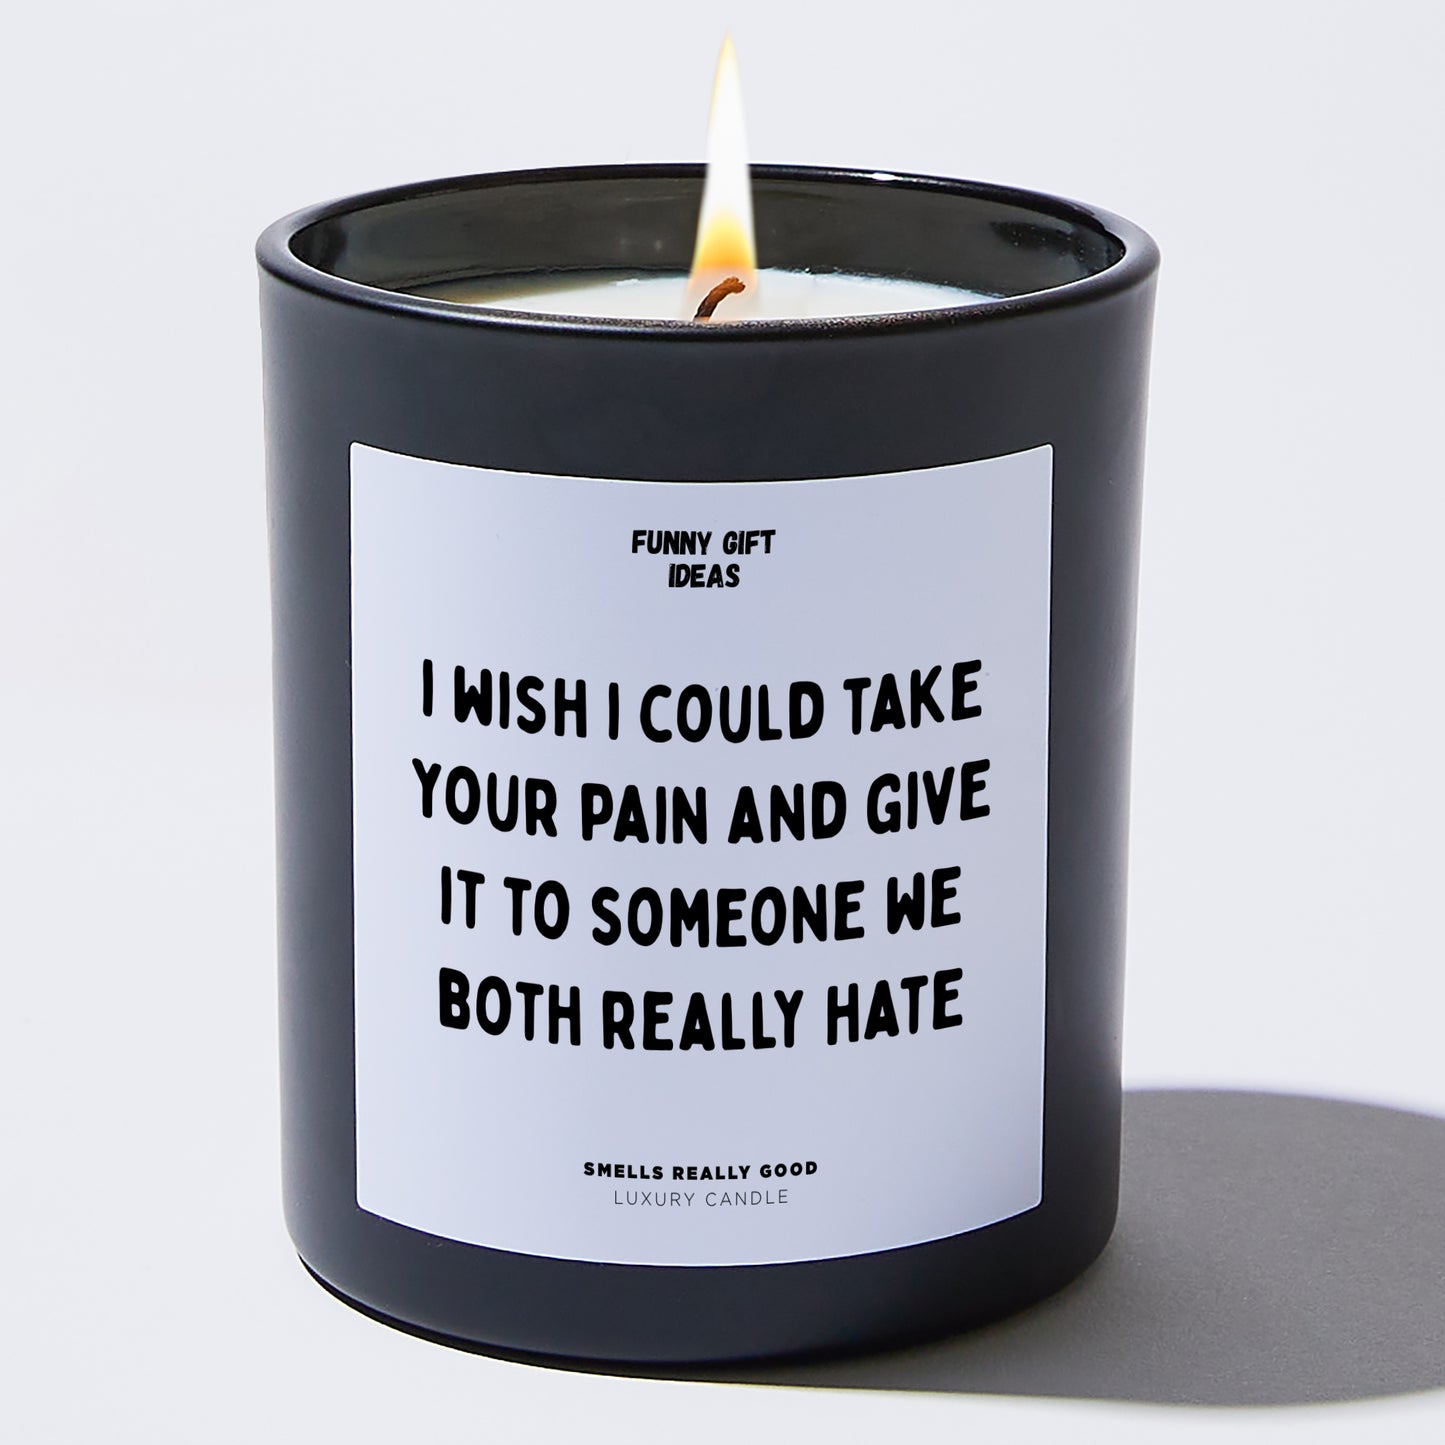 Fun Gift for Friends - I Wish I Could Take Your Pain And Give It To Someone We Both Really Hate - Candle